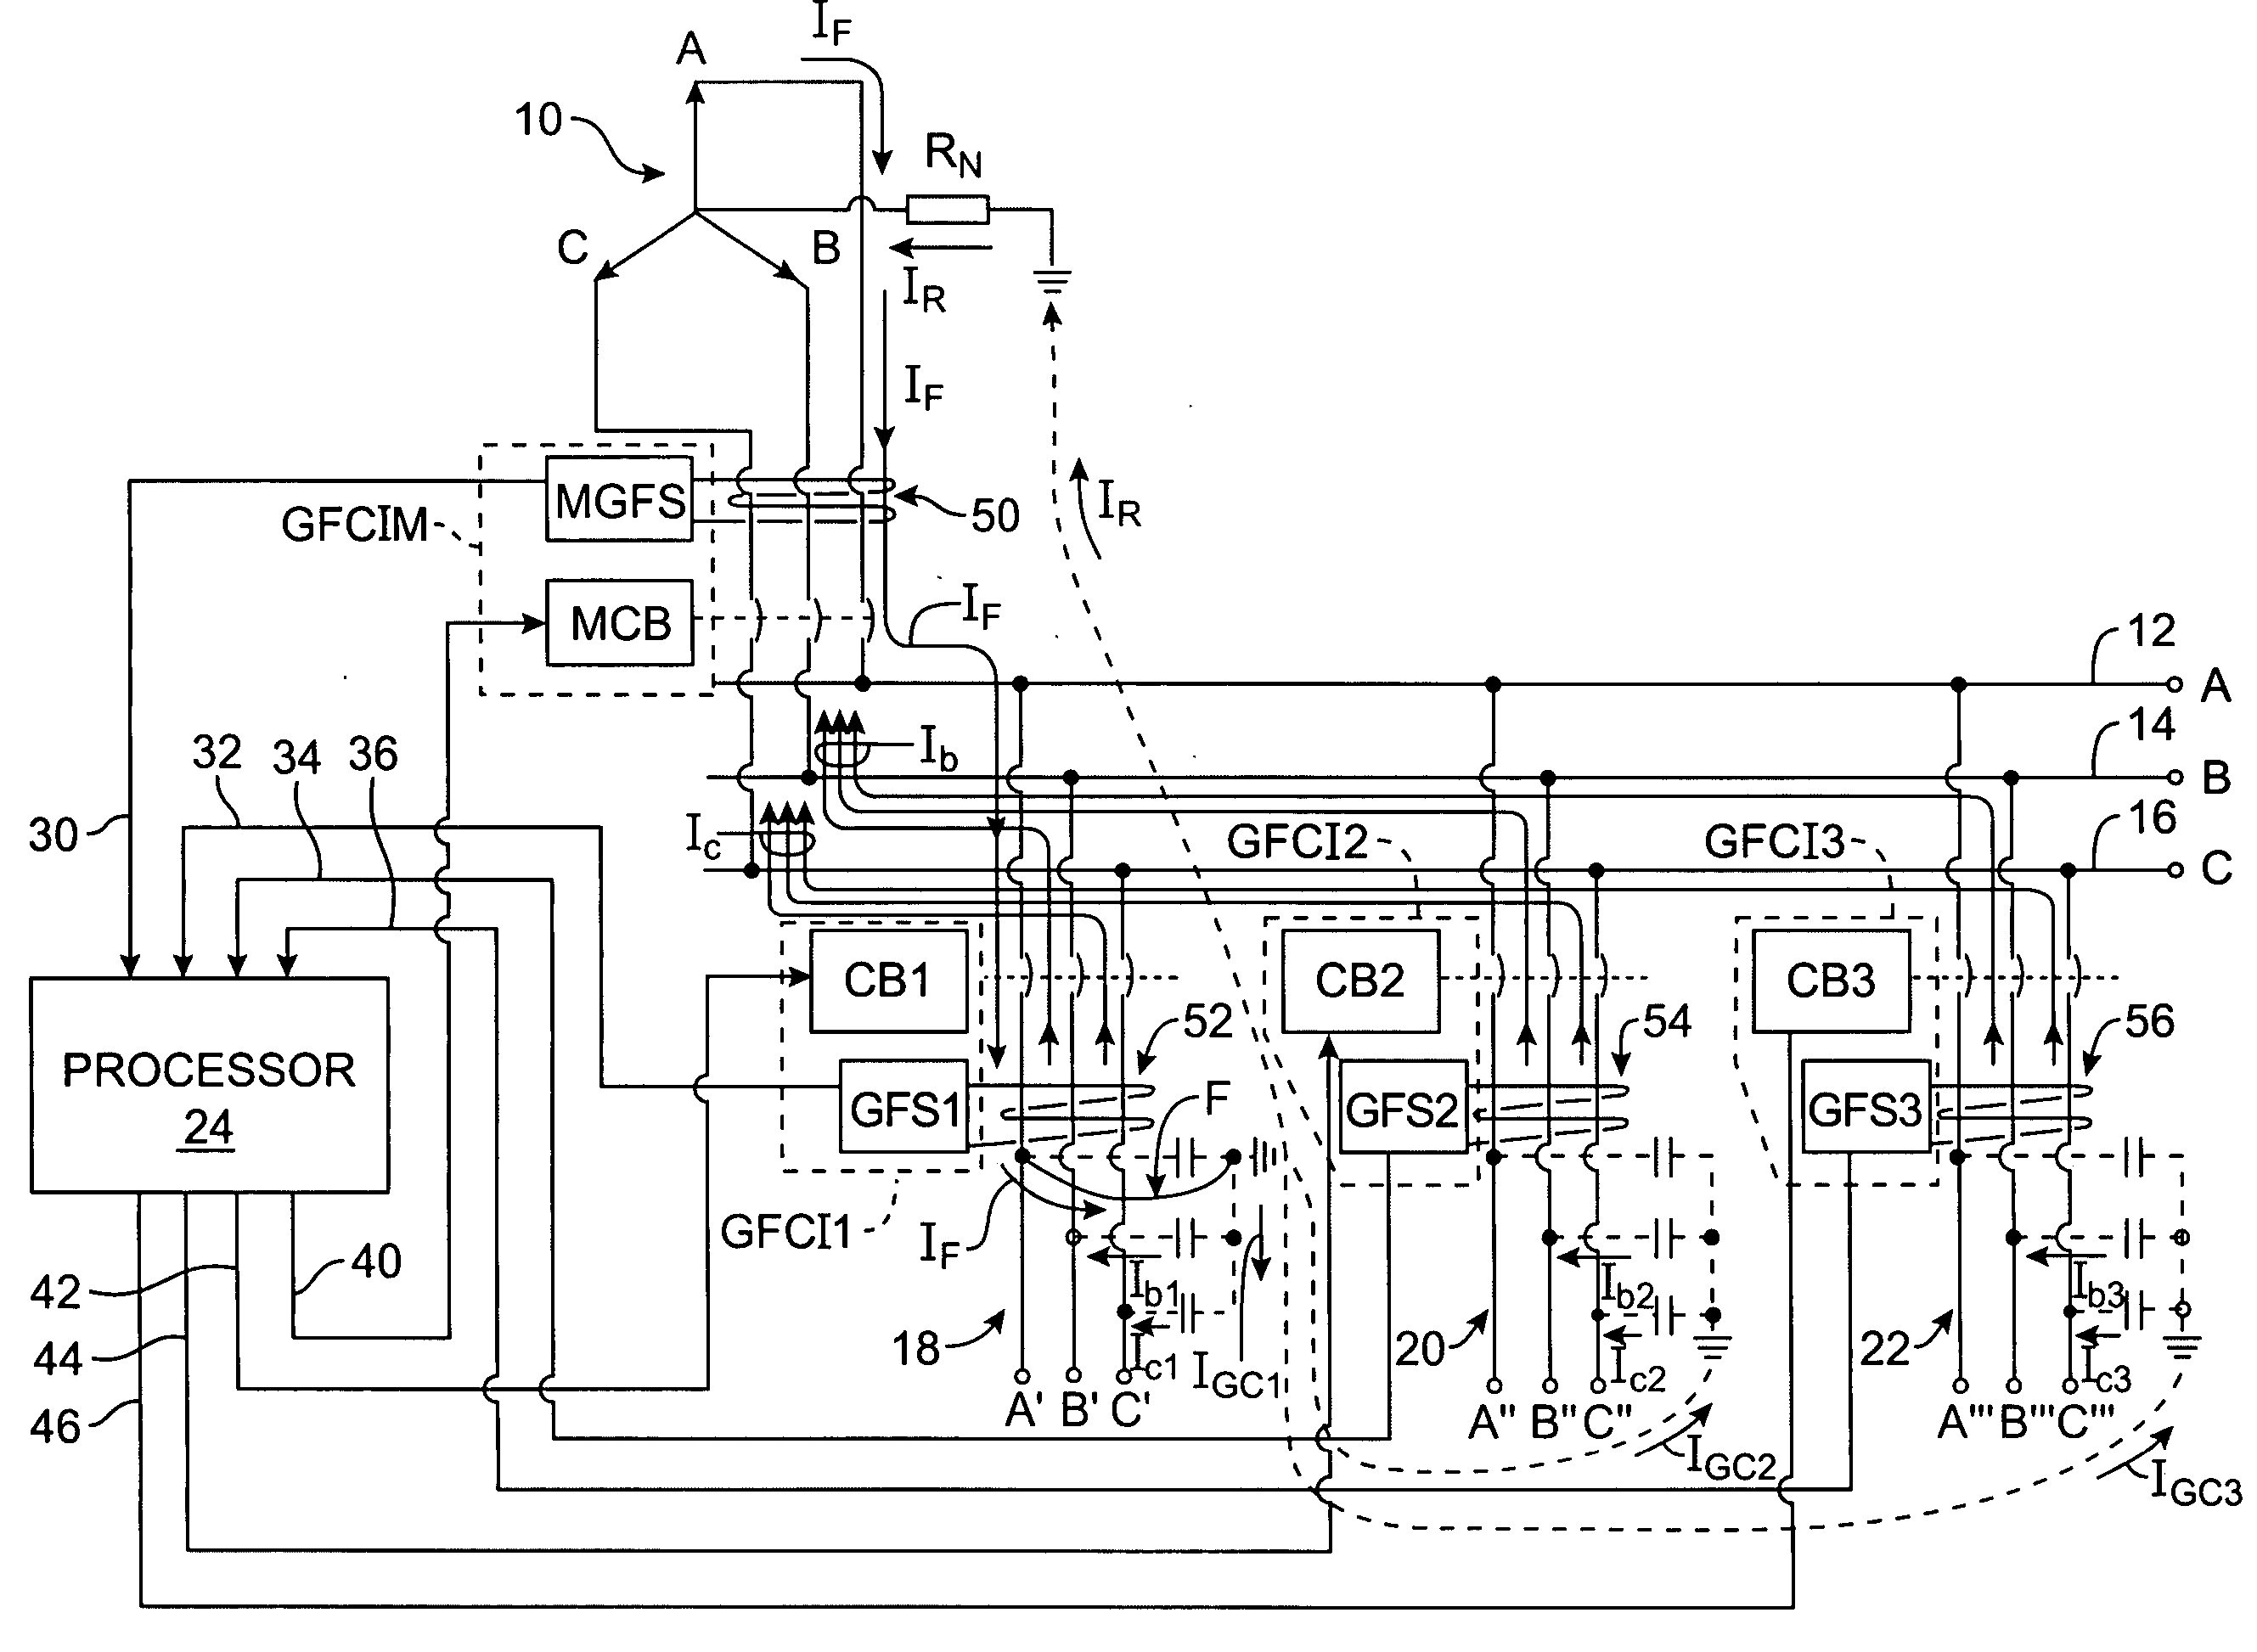 Ground-fault circuit-interrupter system for three-phase electrical power systems